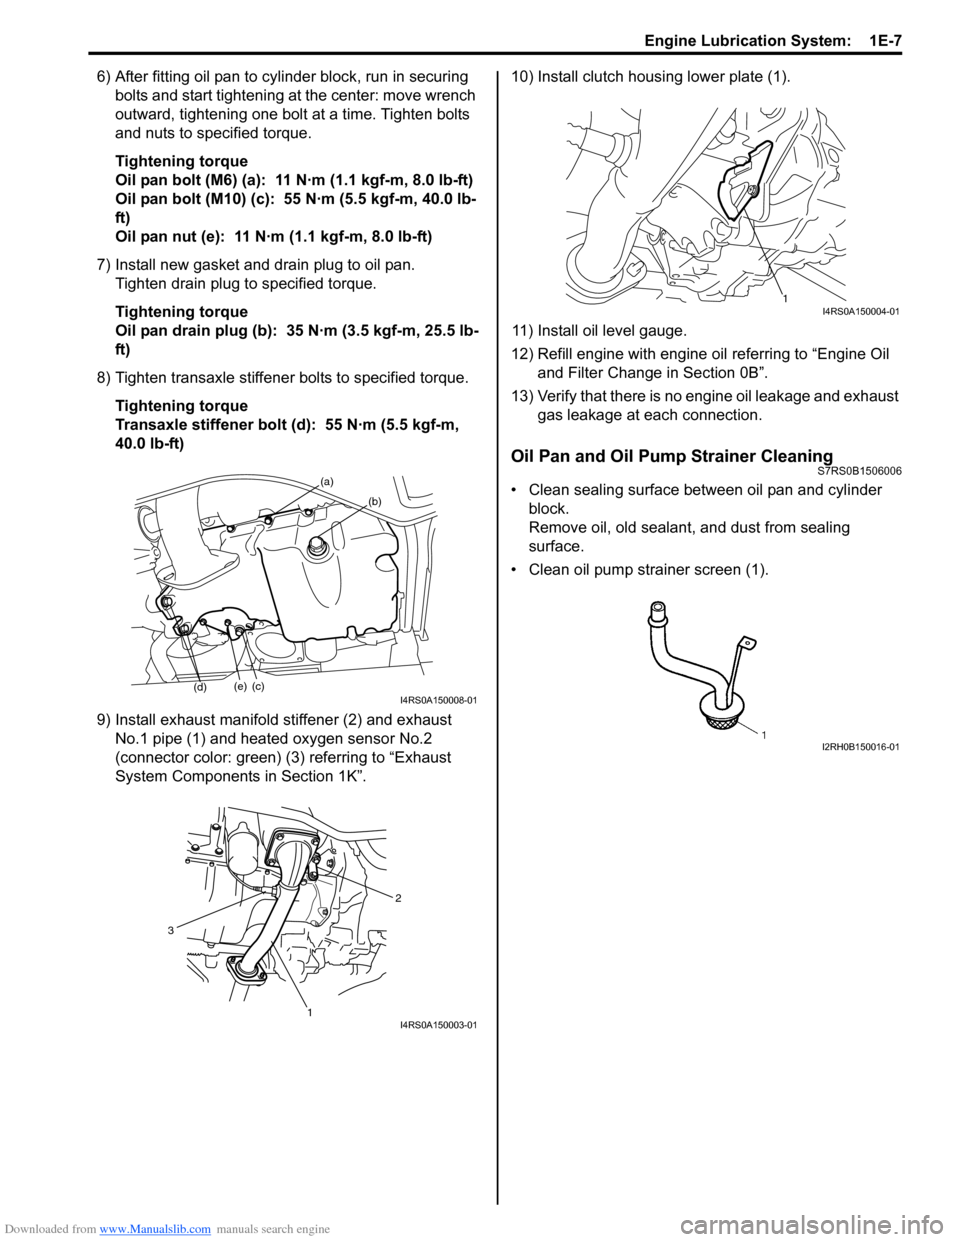 SUZUKI SWIFT 2006 2.G Service User Guide Downloaded from www.Manualslib.com manuals search engine Engine Lubrication System:  1E-7
6) After fitting oil pan to cylinder block, run in securing bolts and start tightening at the center: move wre